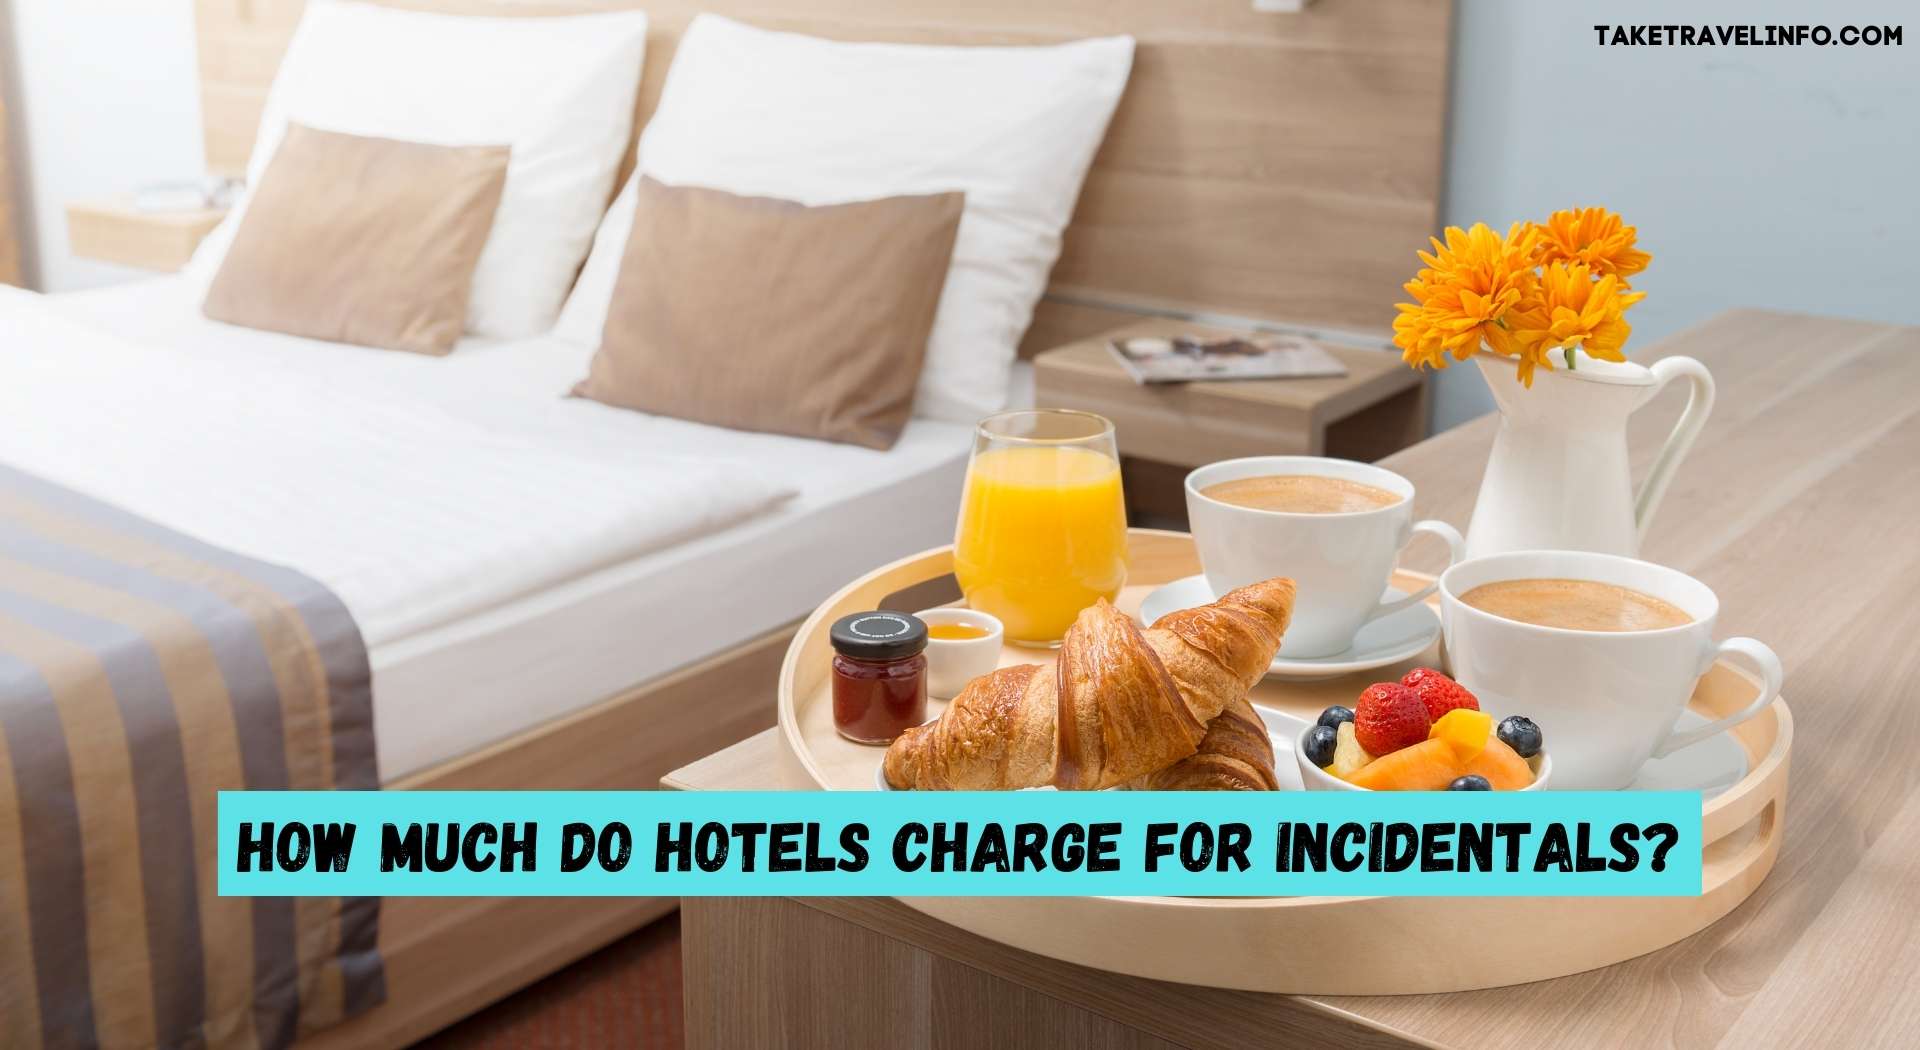 How Much Do Hotels Charge for Incidentals